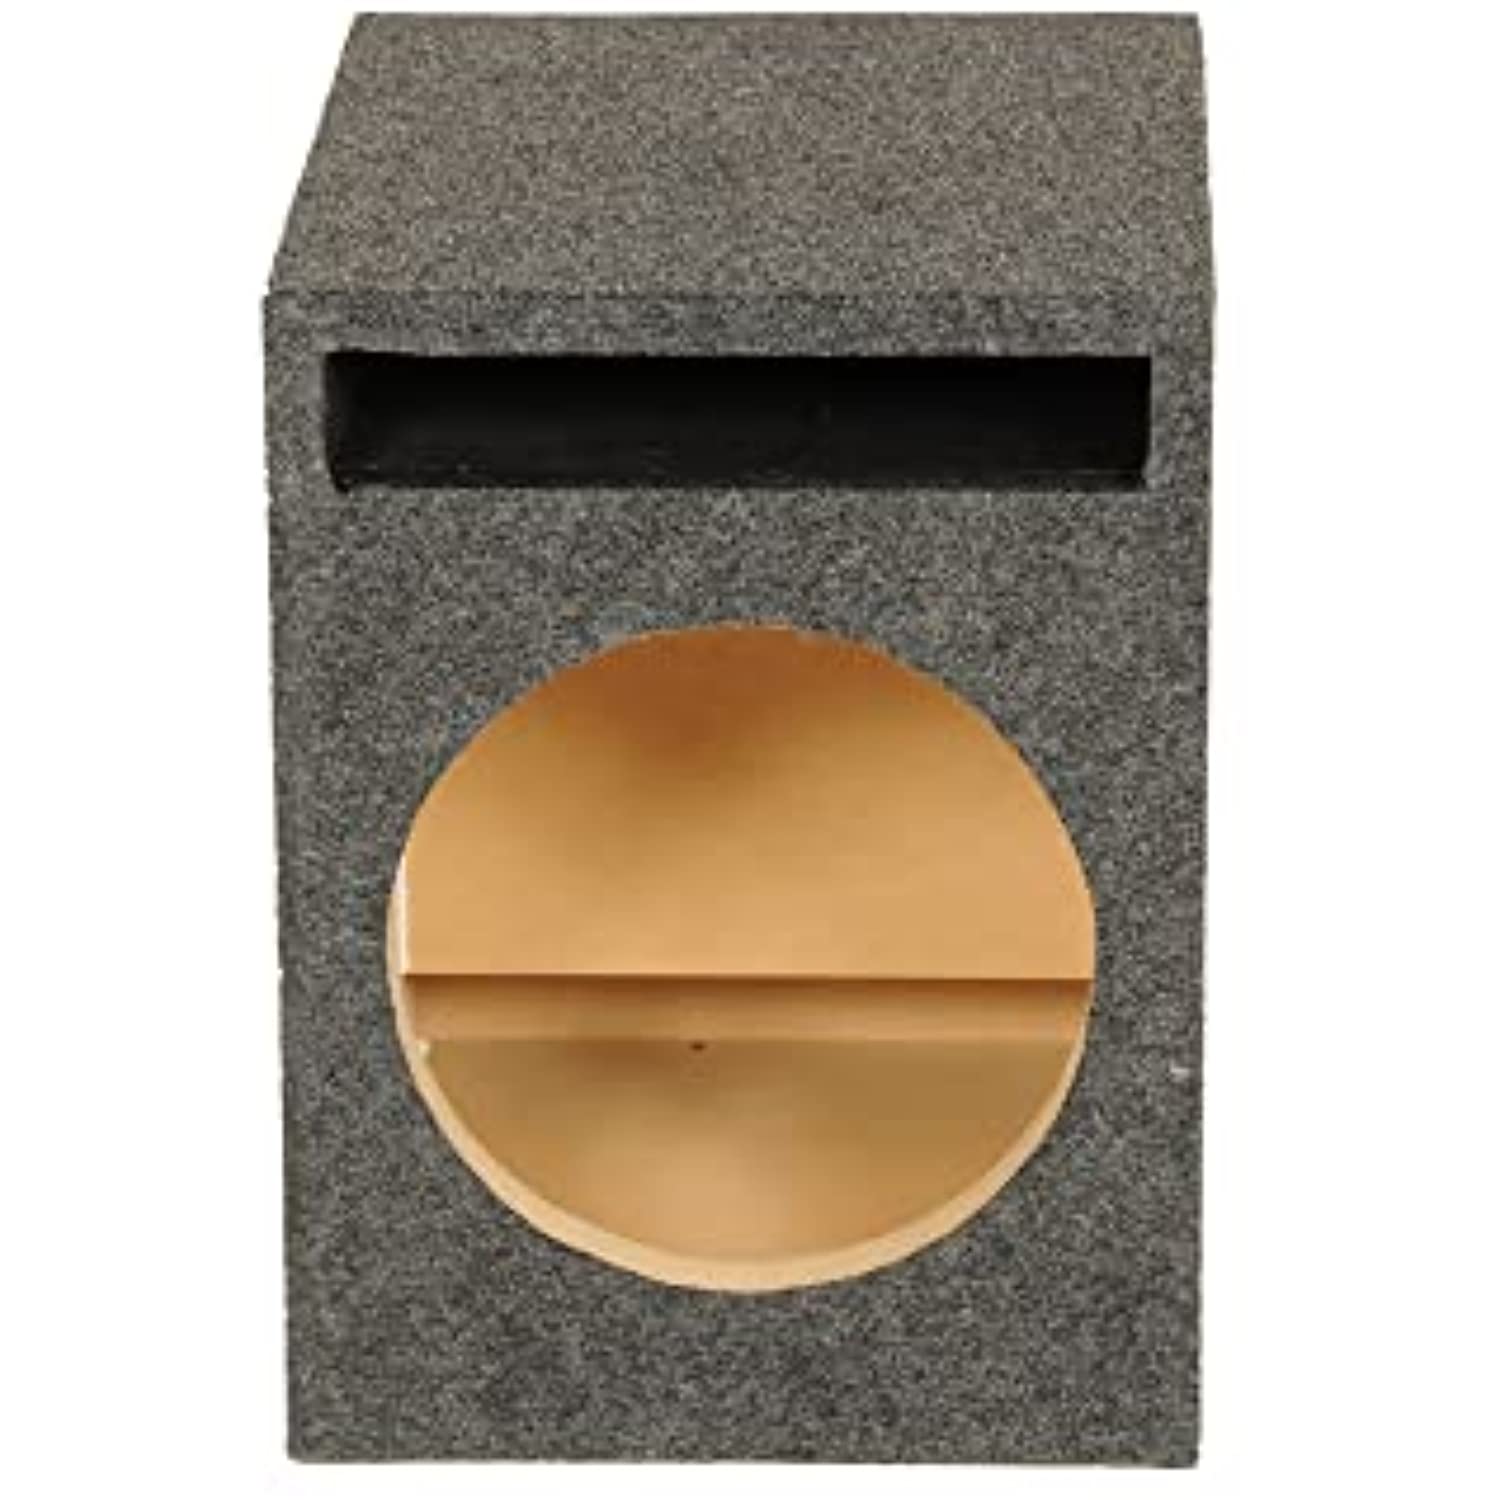 Q Power HD110 Vented Single 10" Ported Heavy Duty Subwoofer Enclosure